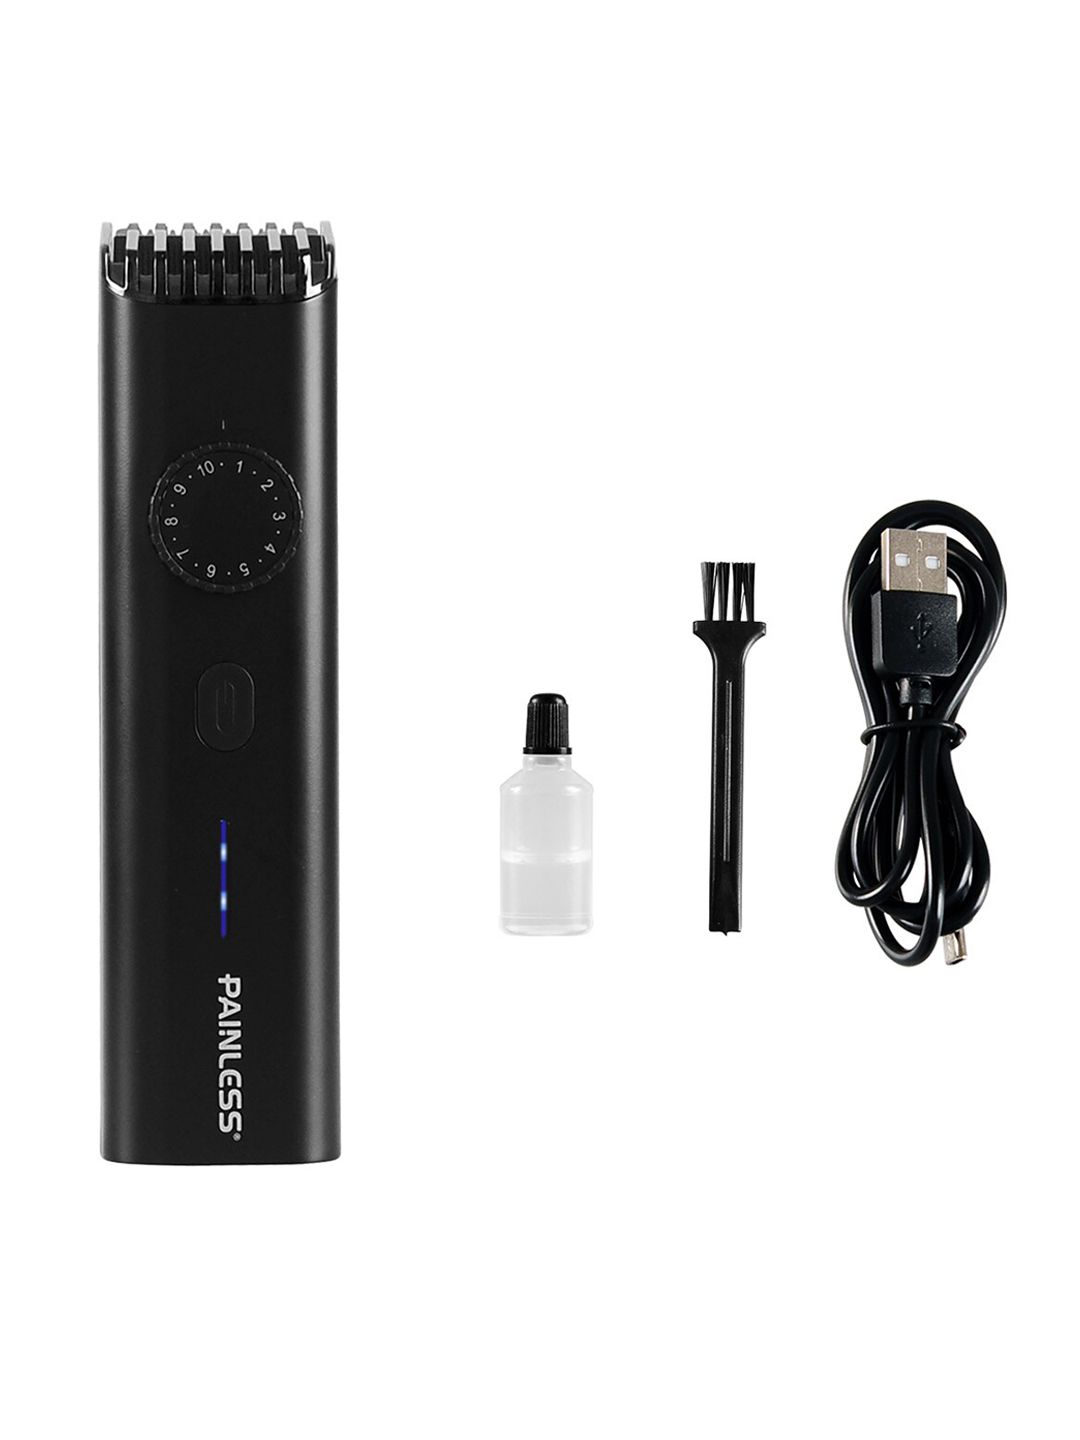 PAINLESS Black Rechargeable Hair Trimmer Price in India